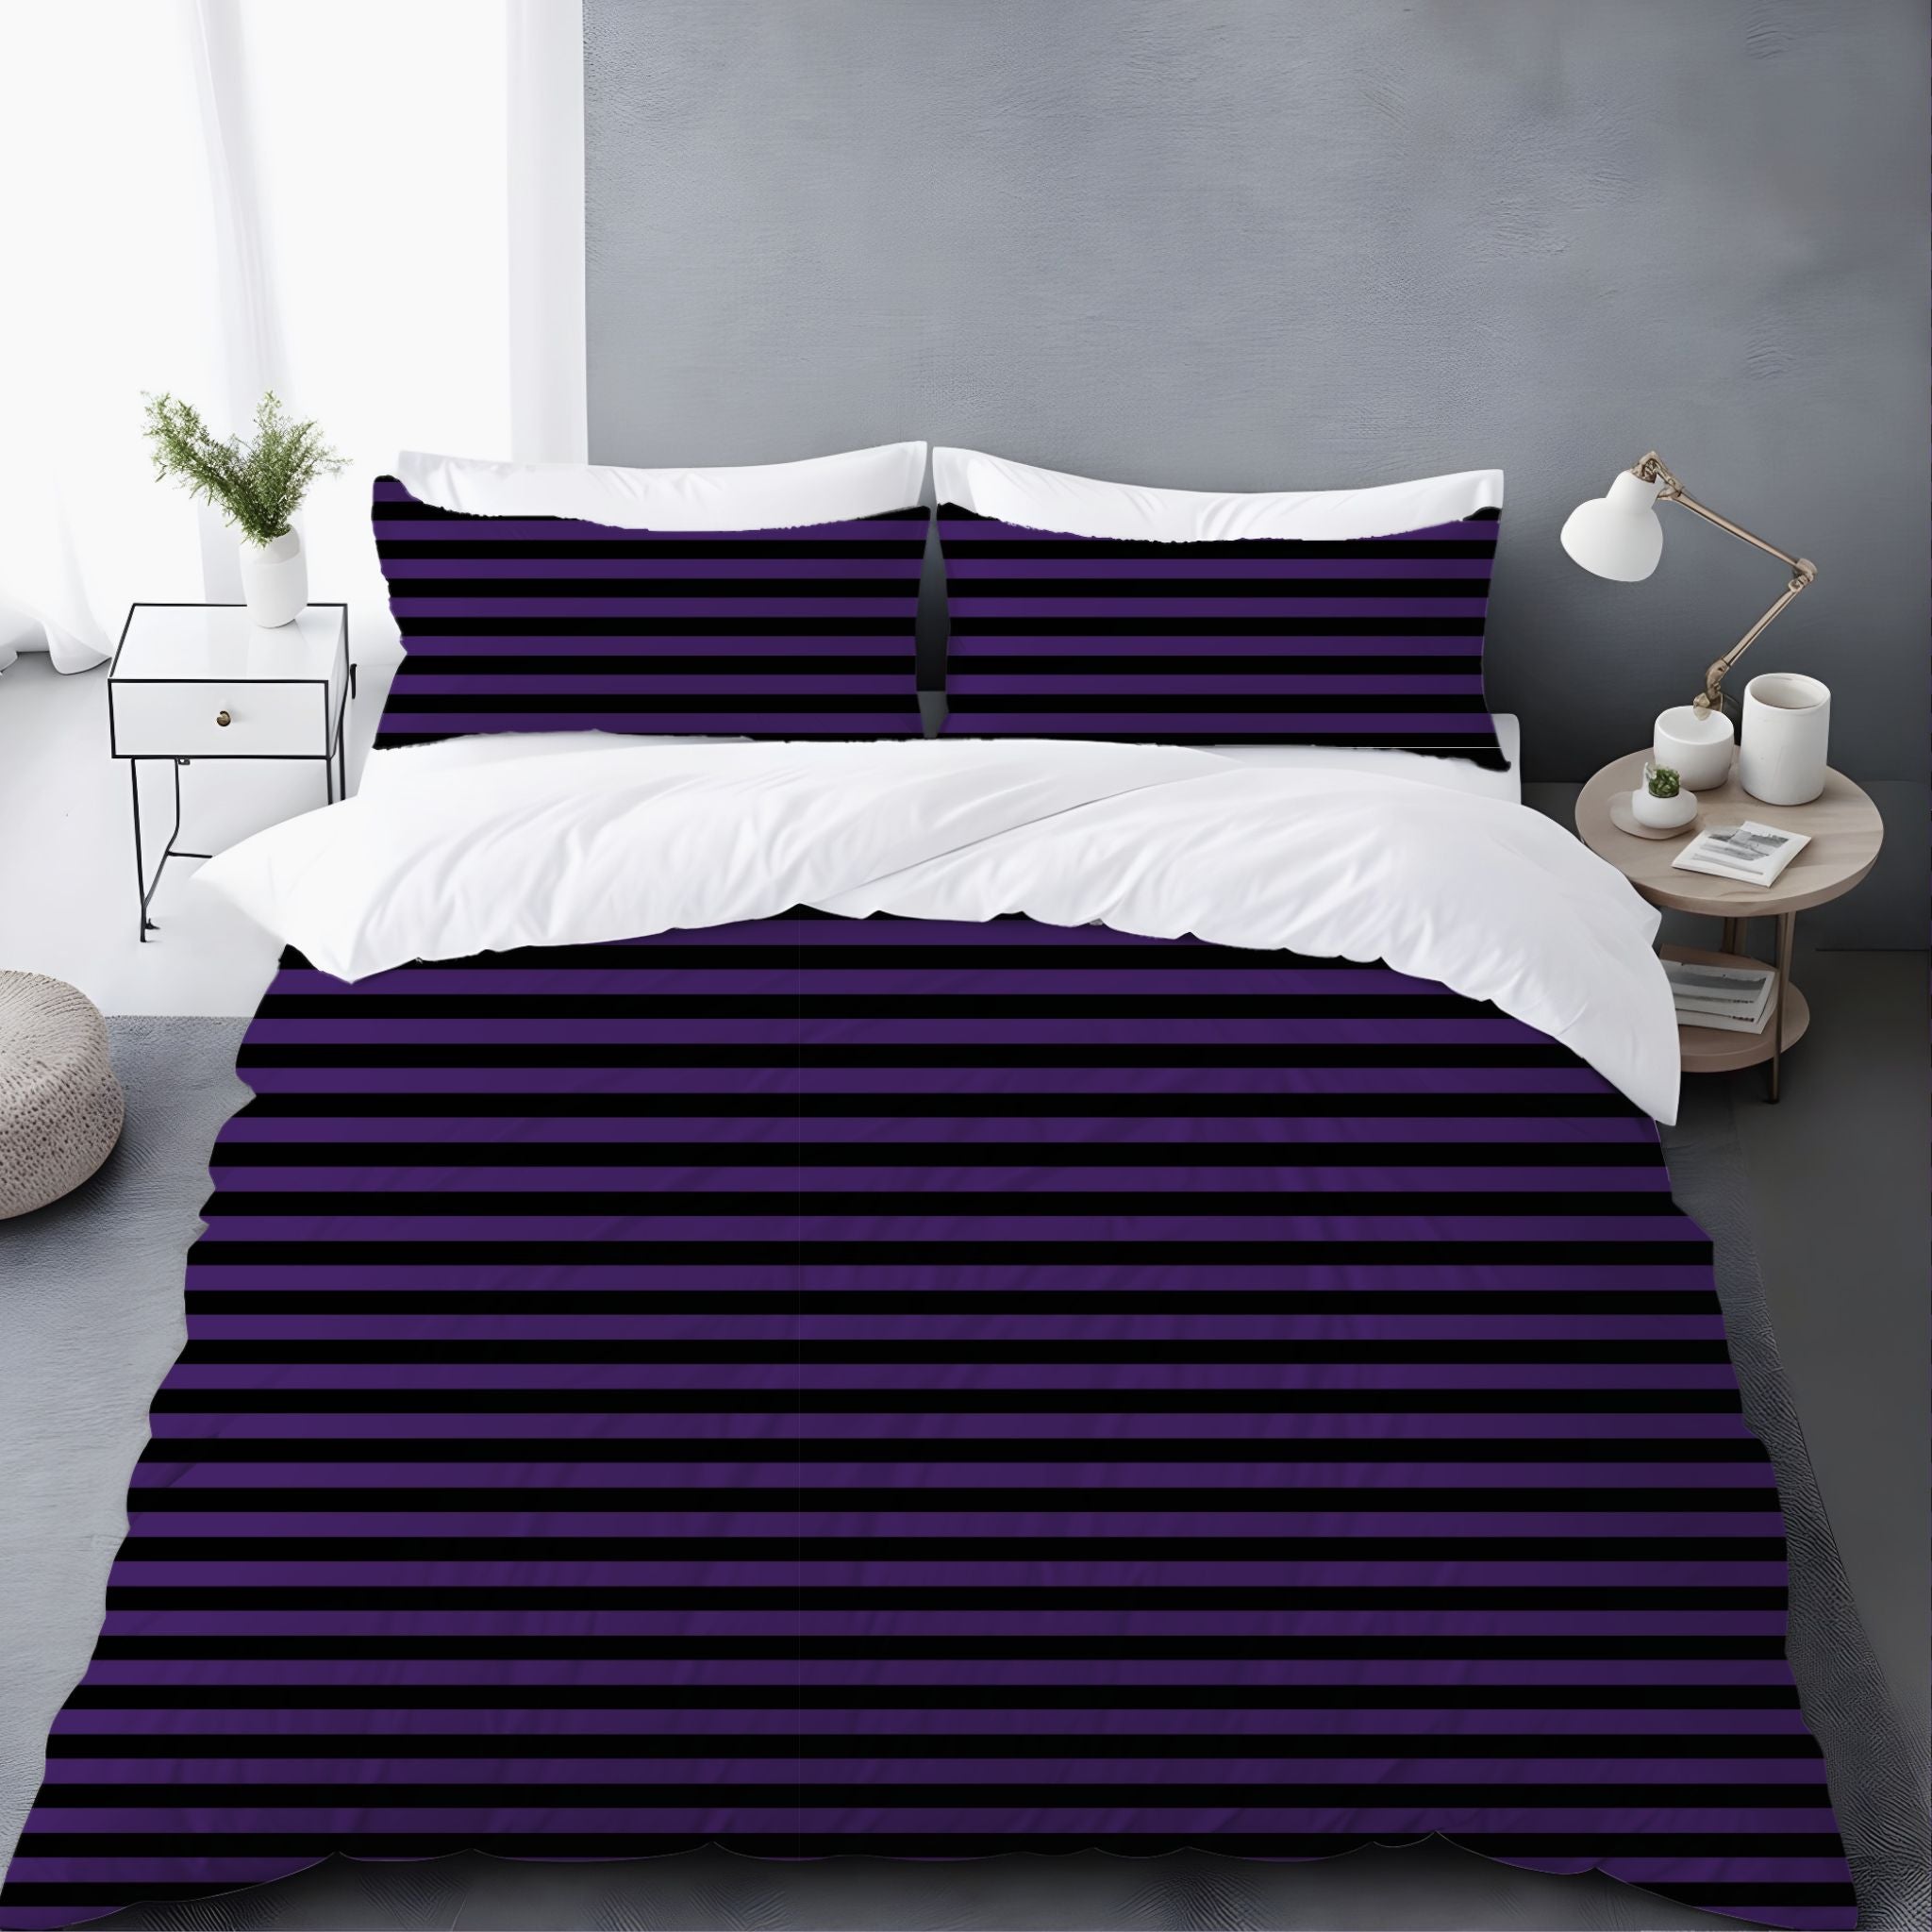 Sinister Stripes Purple and Black Striped Duvet Cover and Pillow Shams